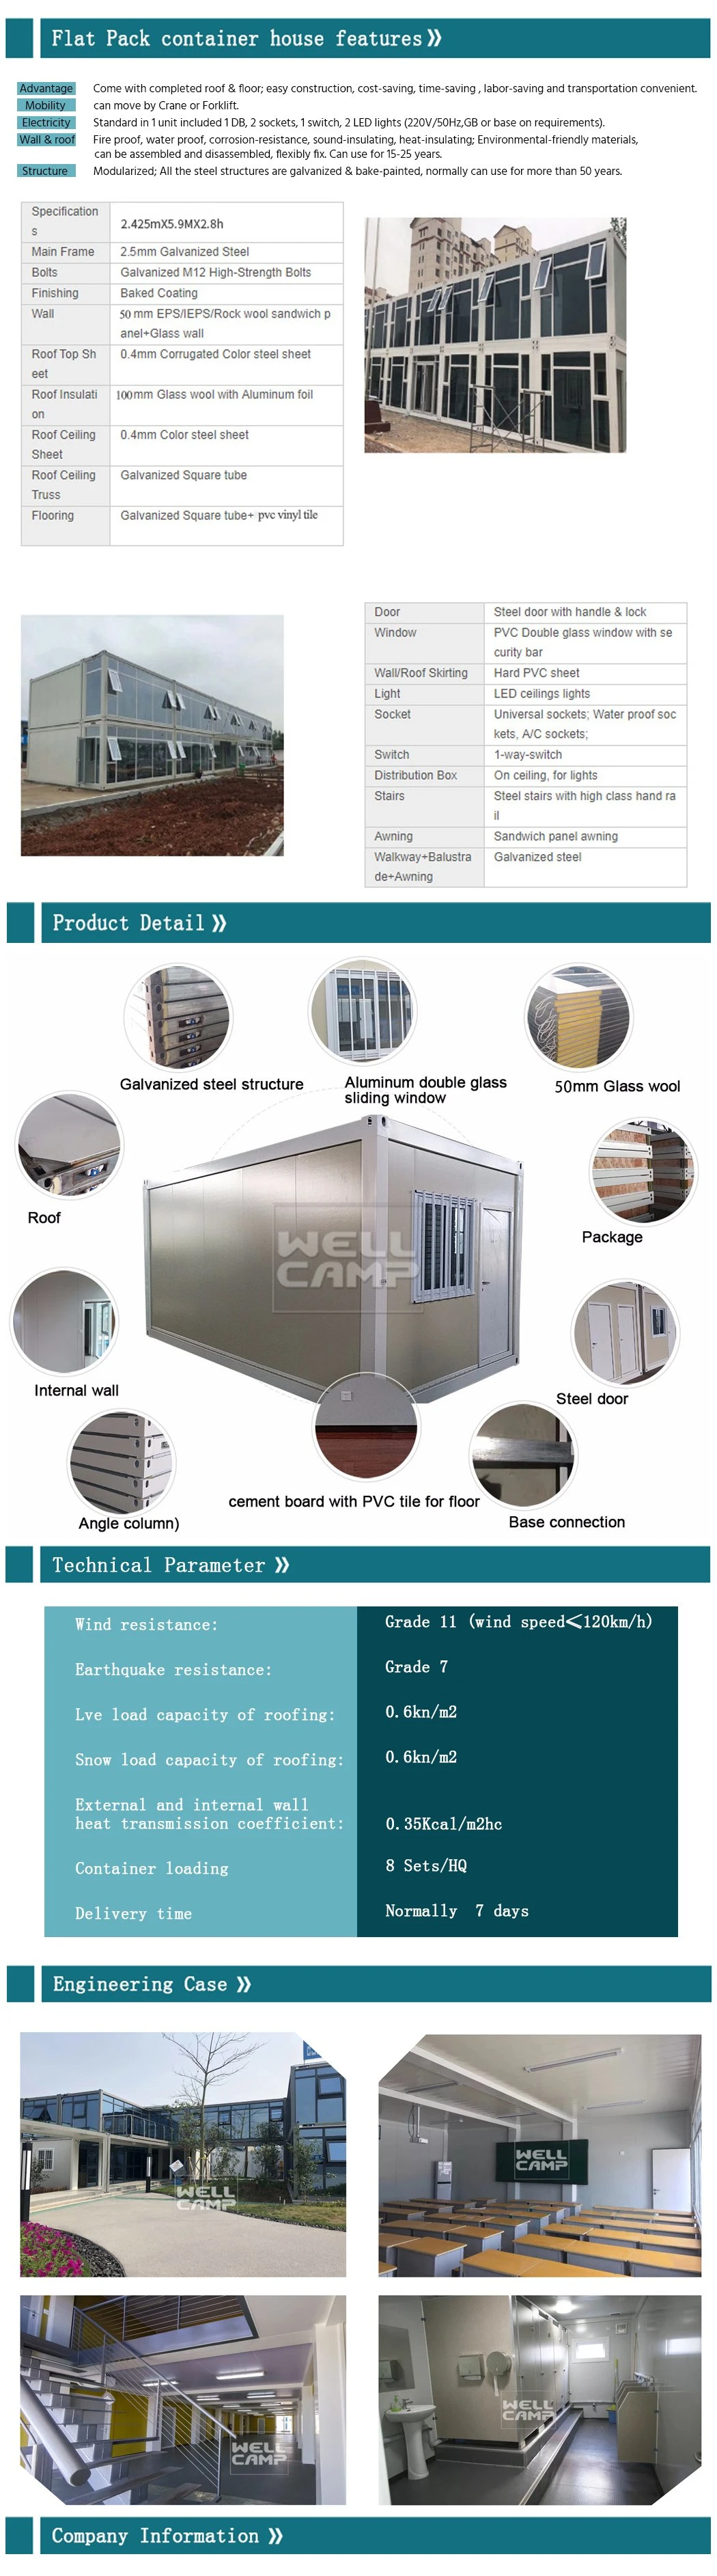 Prefabricated Affordable Shipping Container Hotel Modern Flat Pack Container Hotel Sea Living Container Hotel